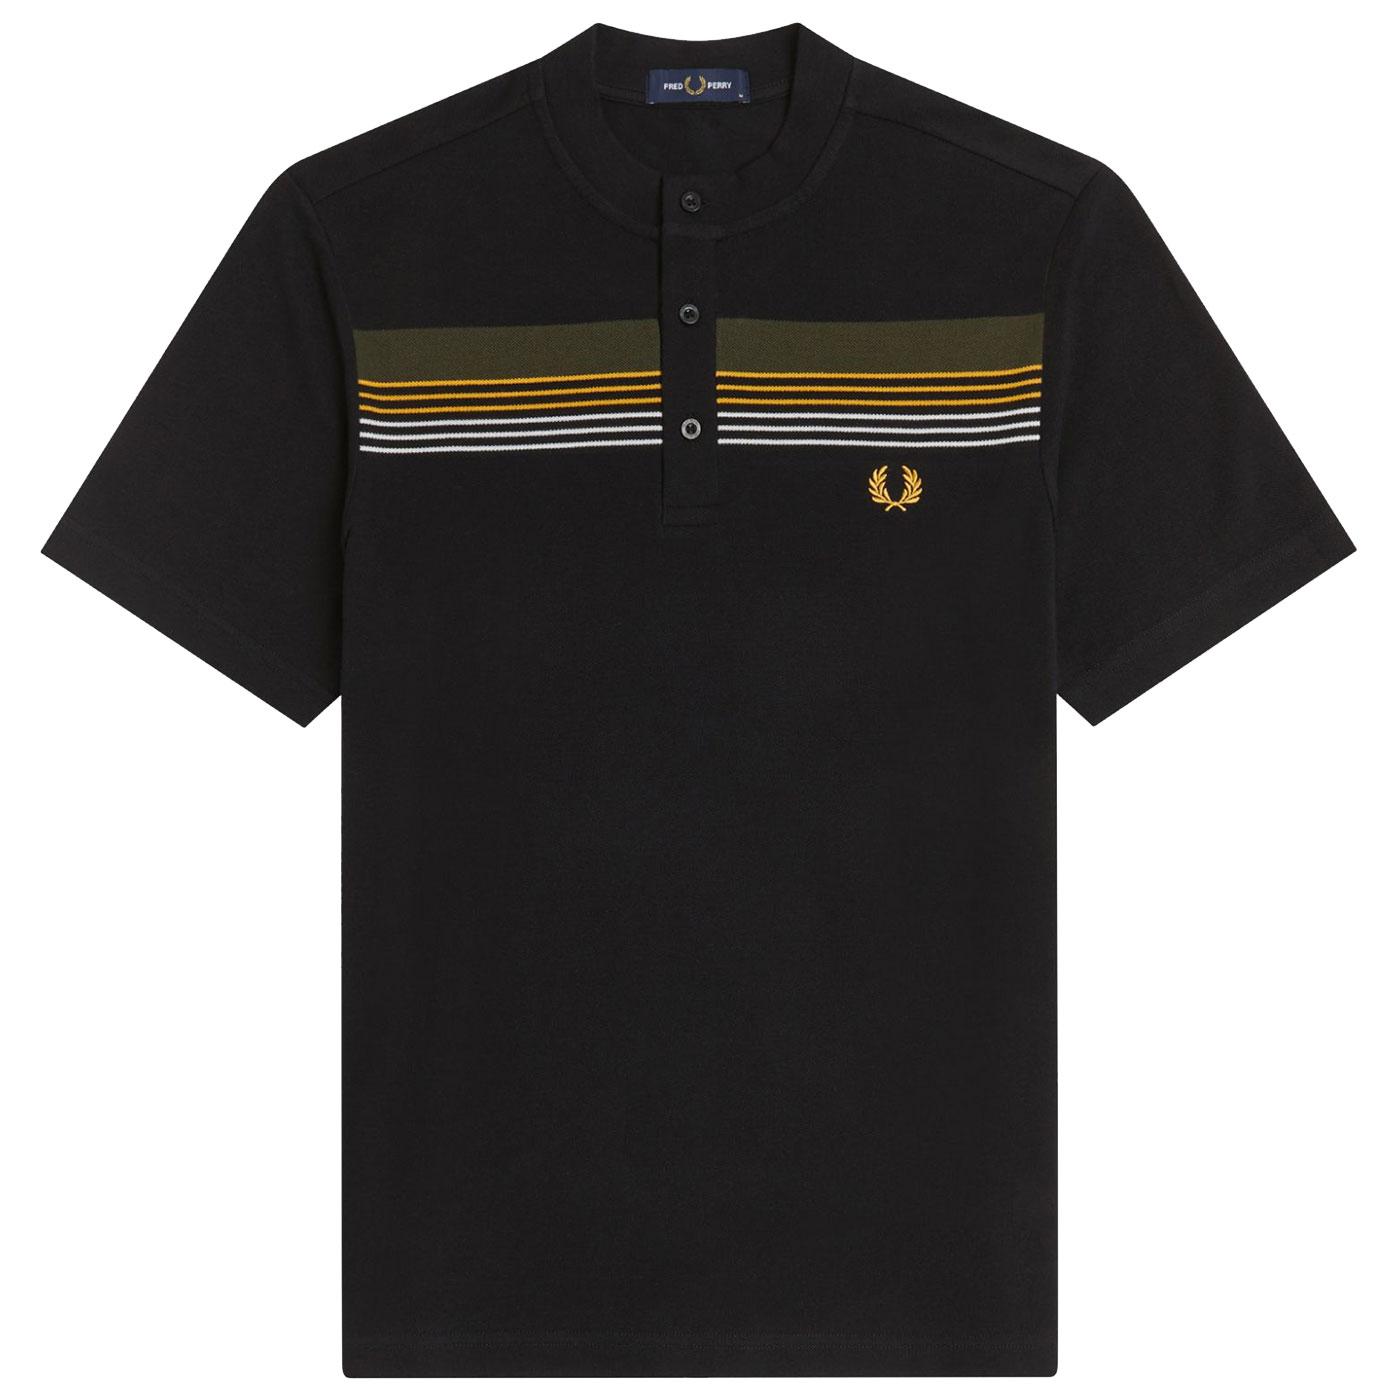 FRED PERRY Mod Engineered Stripe Pique Henley Top